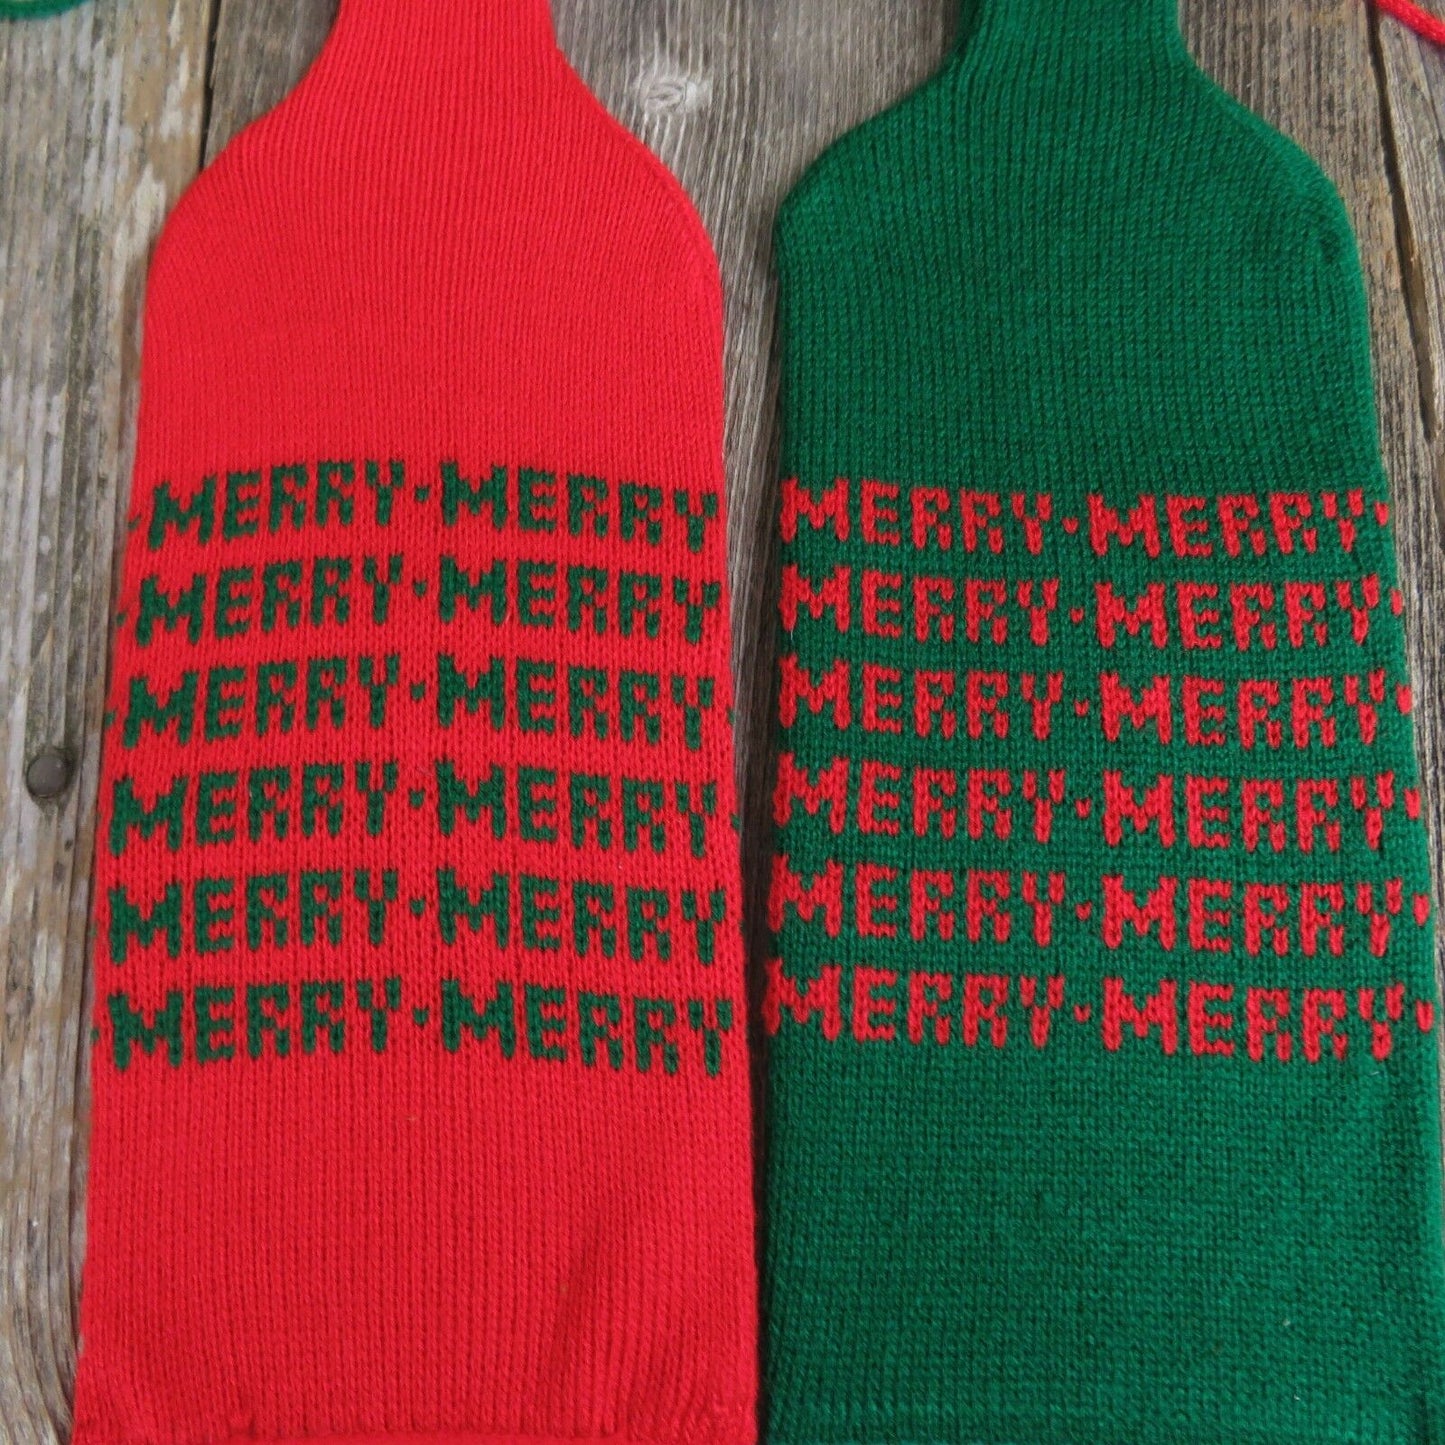 Vintage Christmas Bottle Tote Cover Knitted Stocking Department 56 Gift Bag Set - At Grandma's Table